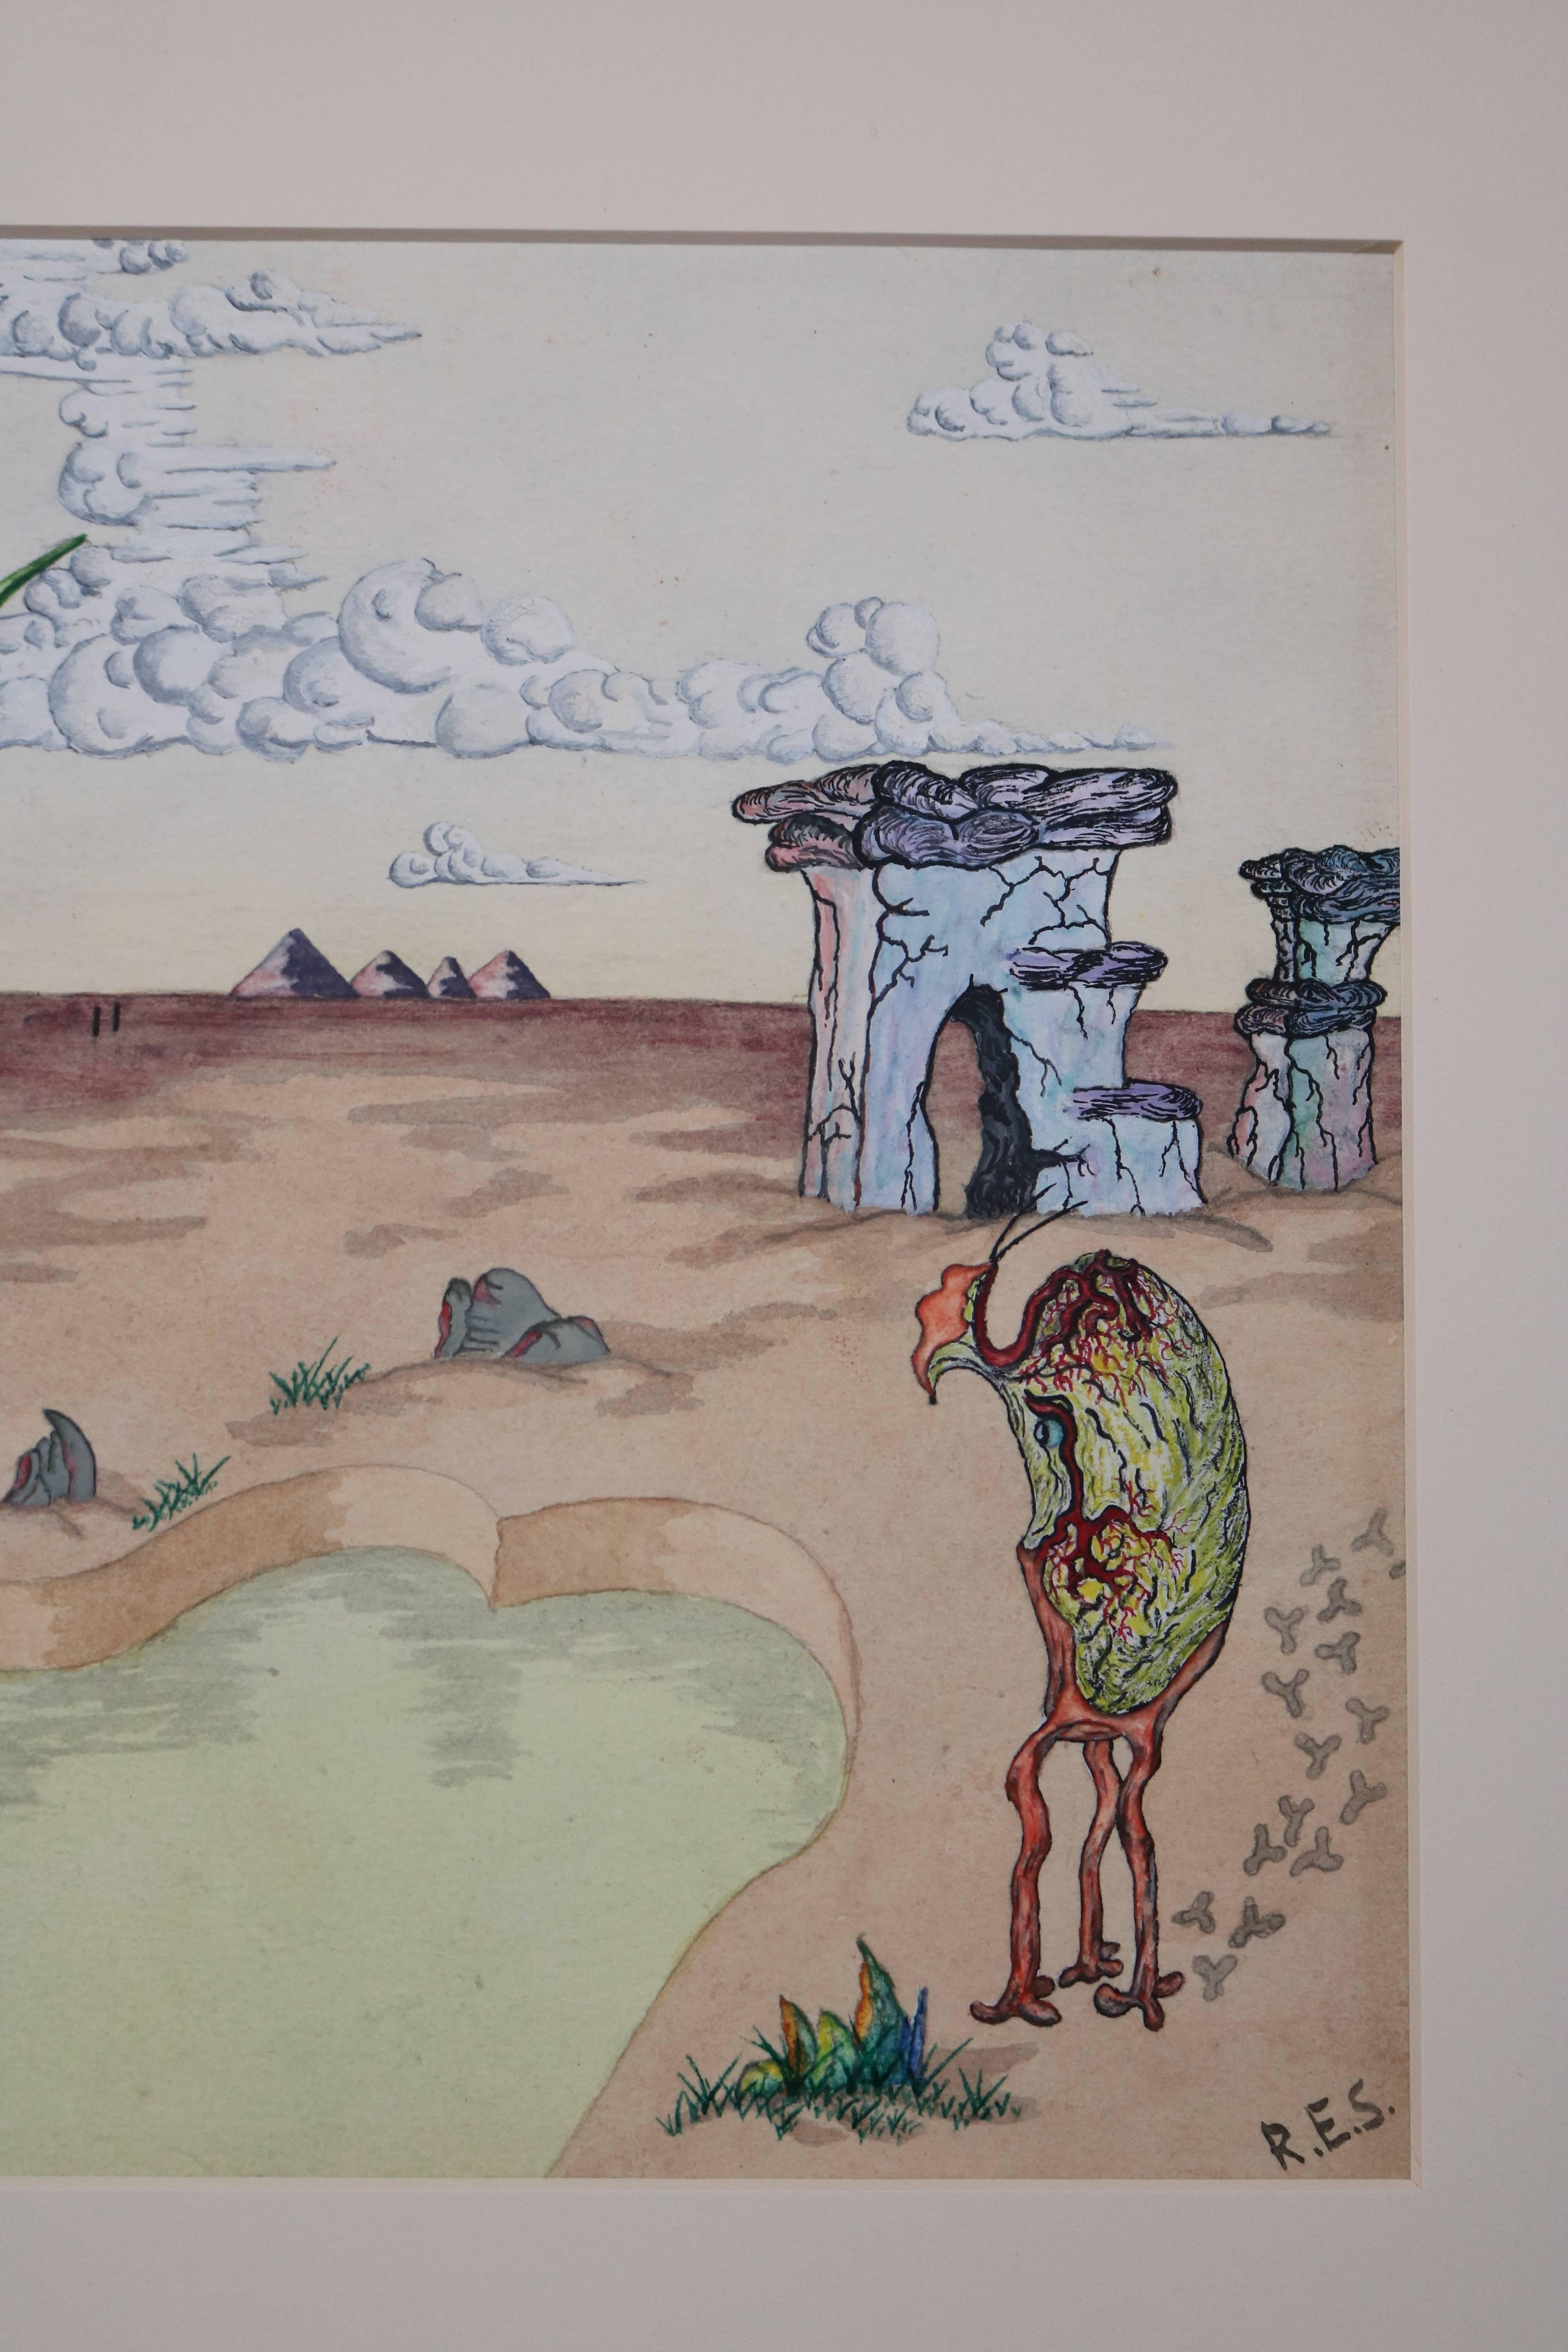 Surrealist Landscape Watercolor Signed R. E. Schwelke and Dated 1947 In Excellent Condition For Sale In Pasadena, CA